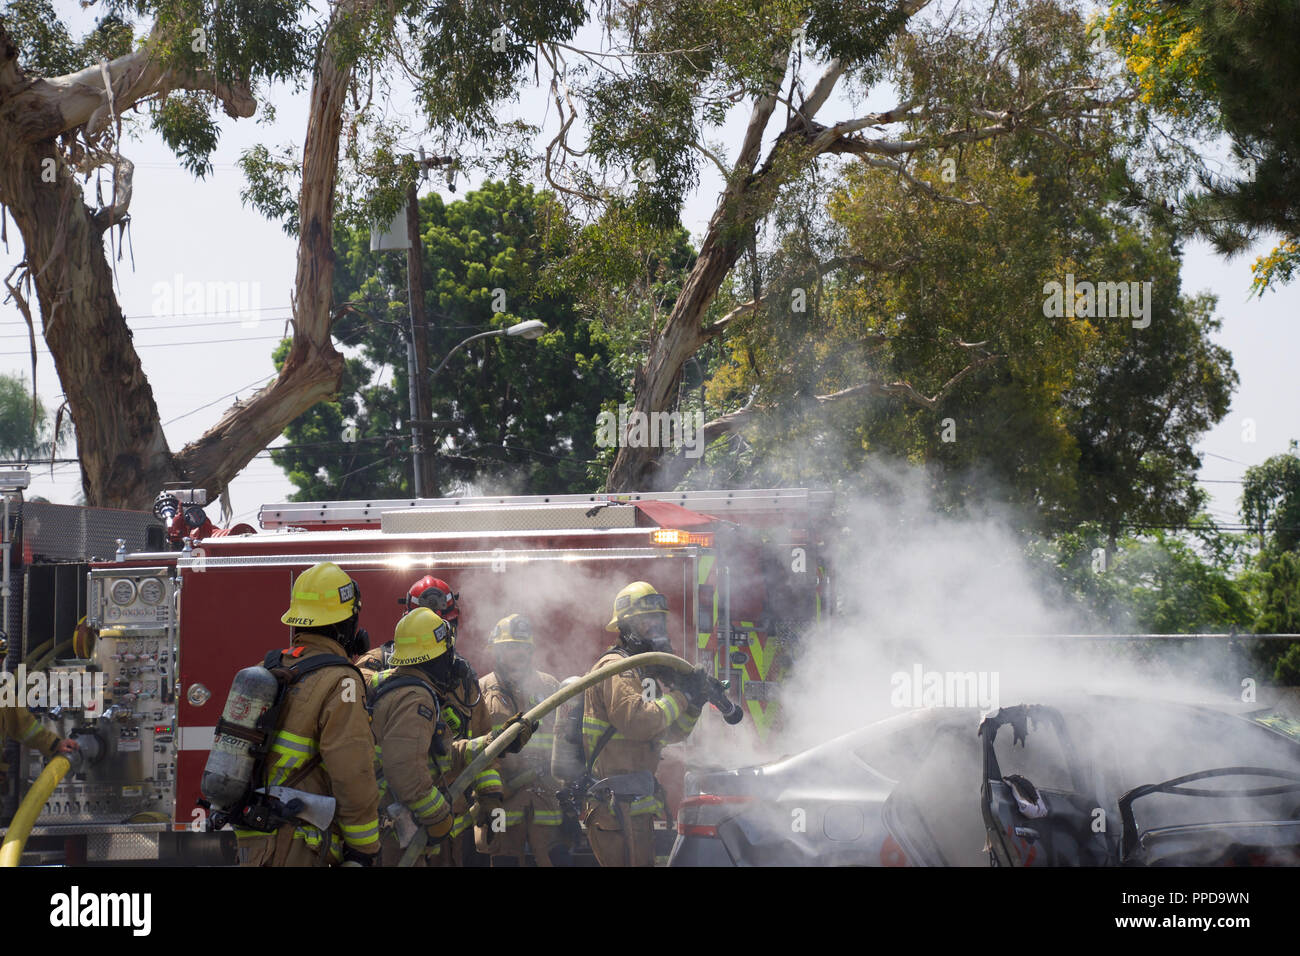 Firemen putting out a fire on a burning car in Downey, CA in 2017 Stock Photo